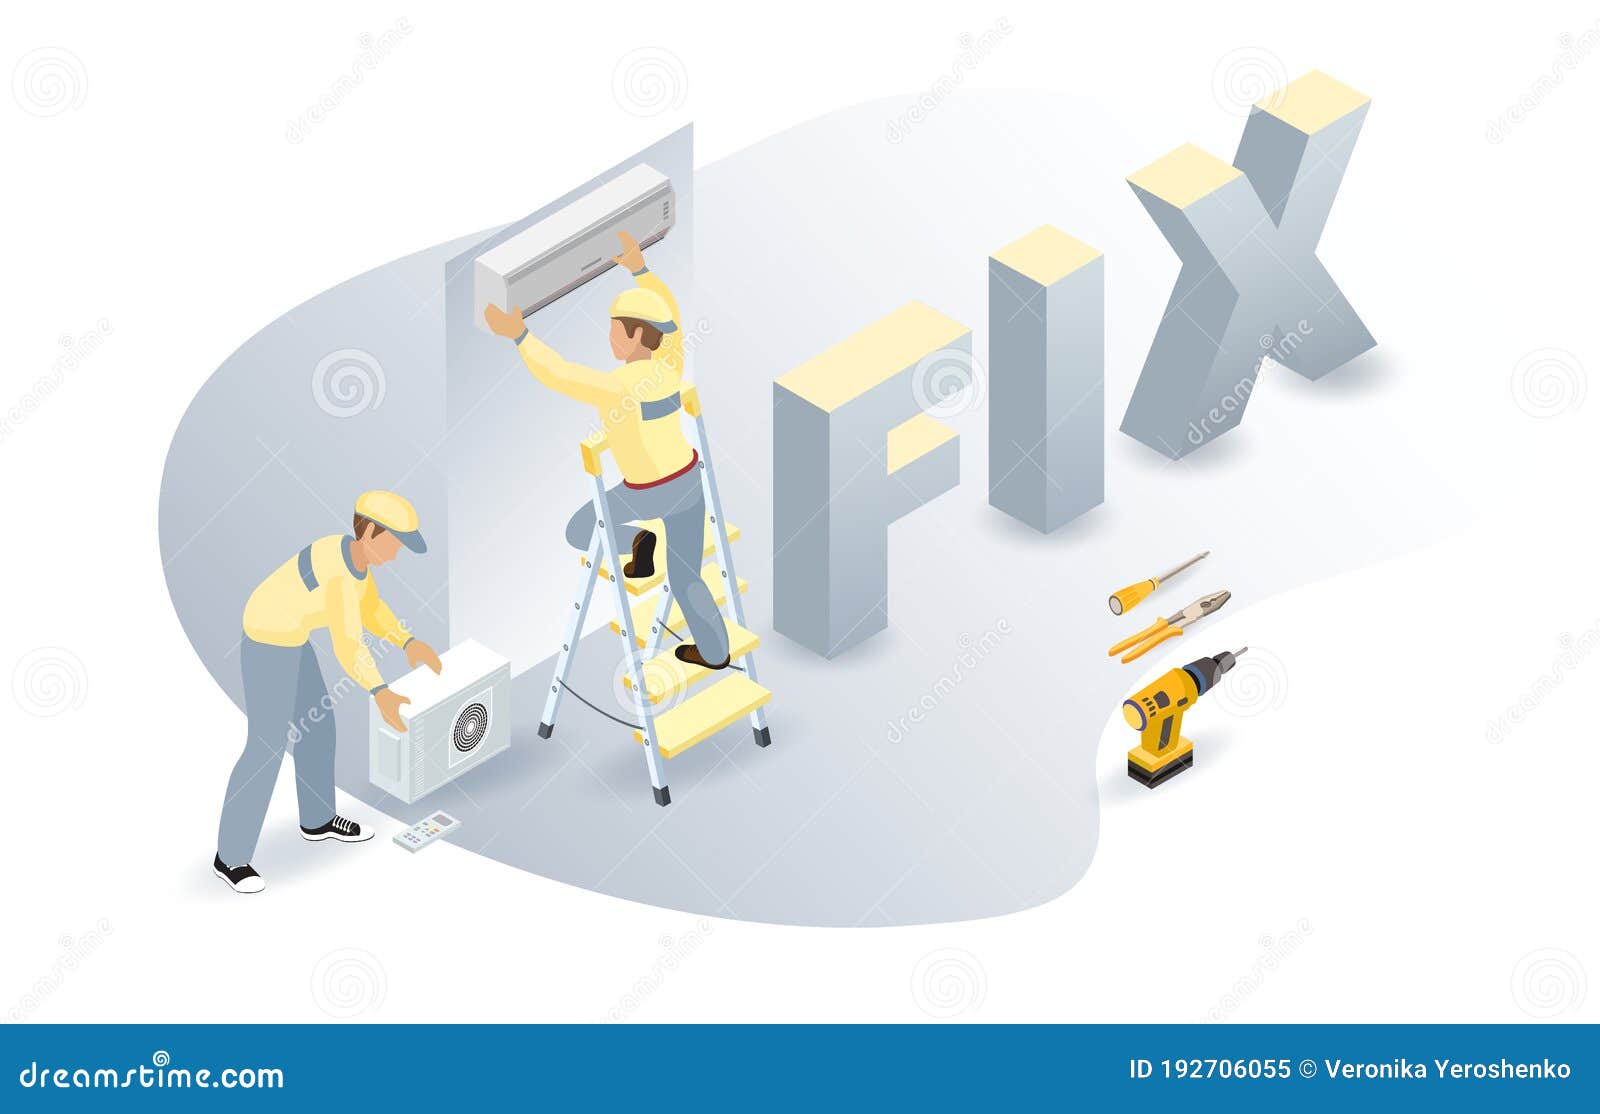 Air Conditioner Worker Isometric Word Fix Home Appliance Repairs Vector Stock Vector Illustration Of Control Electrical 192706055